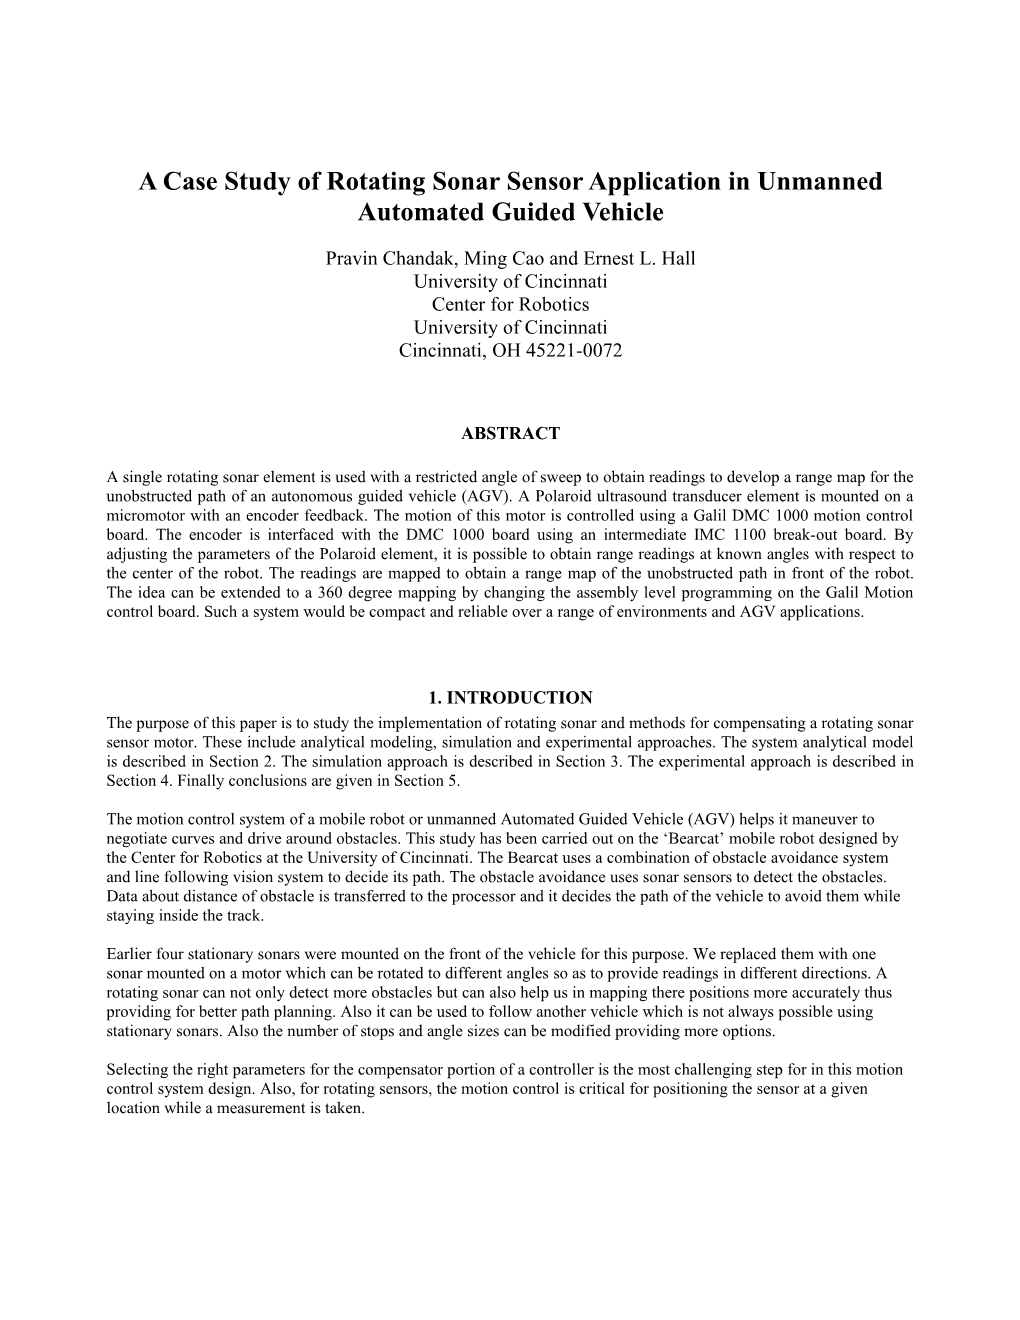 A Case Study of Rotating Sonar Sensor Application in Unmanned Automated Guided Vehicle